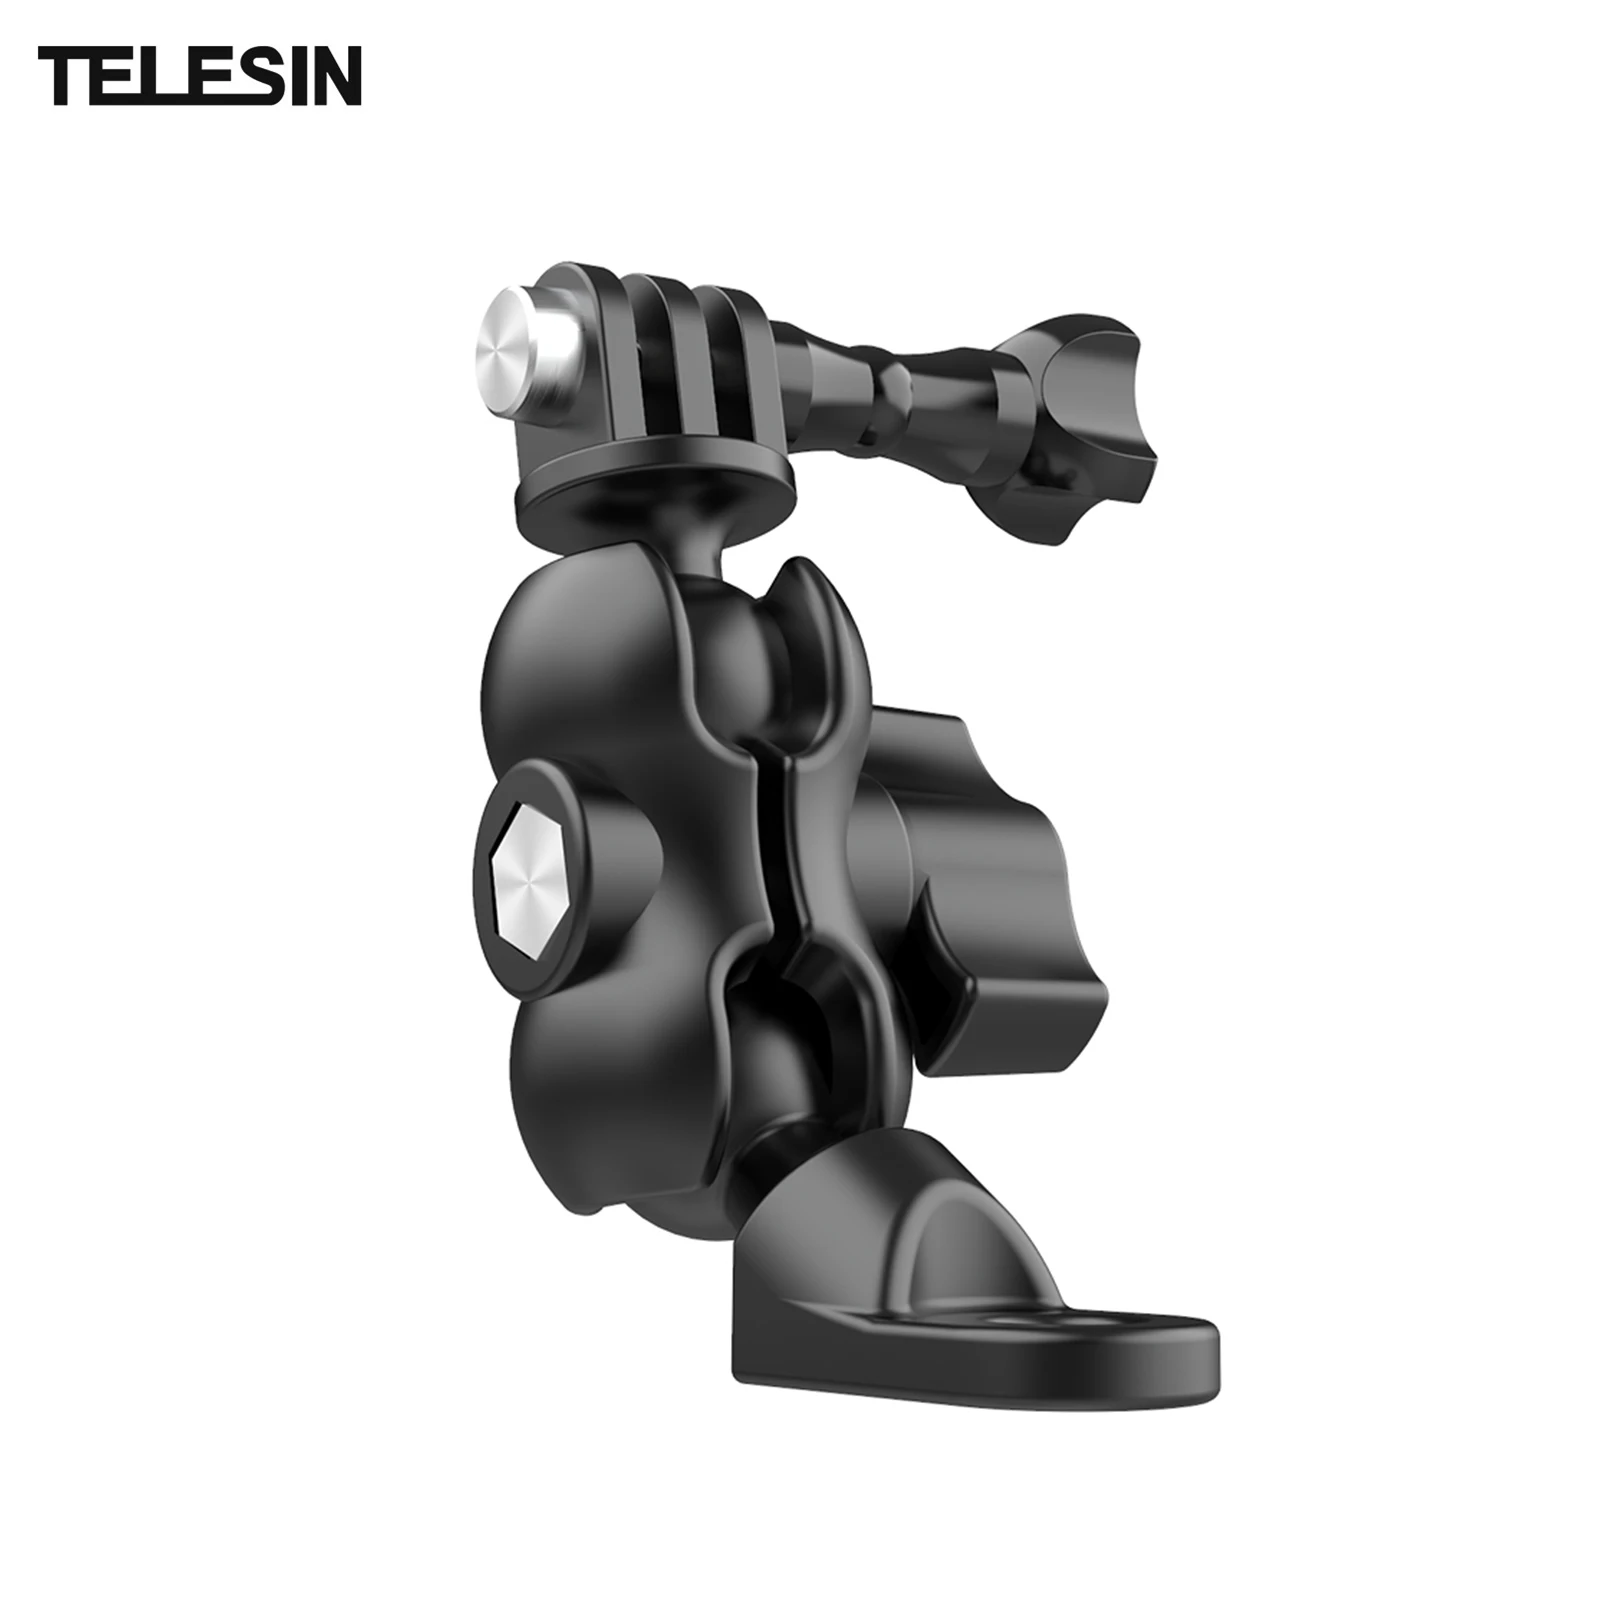 

TELESIN 360° Rotation Action Camera Mount Adapter Motorcycle Rear-view Mirror Mounting Bracket for GoPro Hero 10 9 8 7